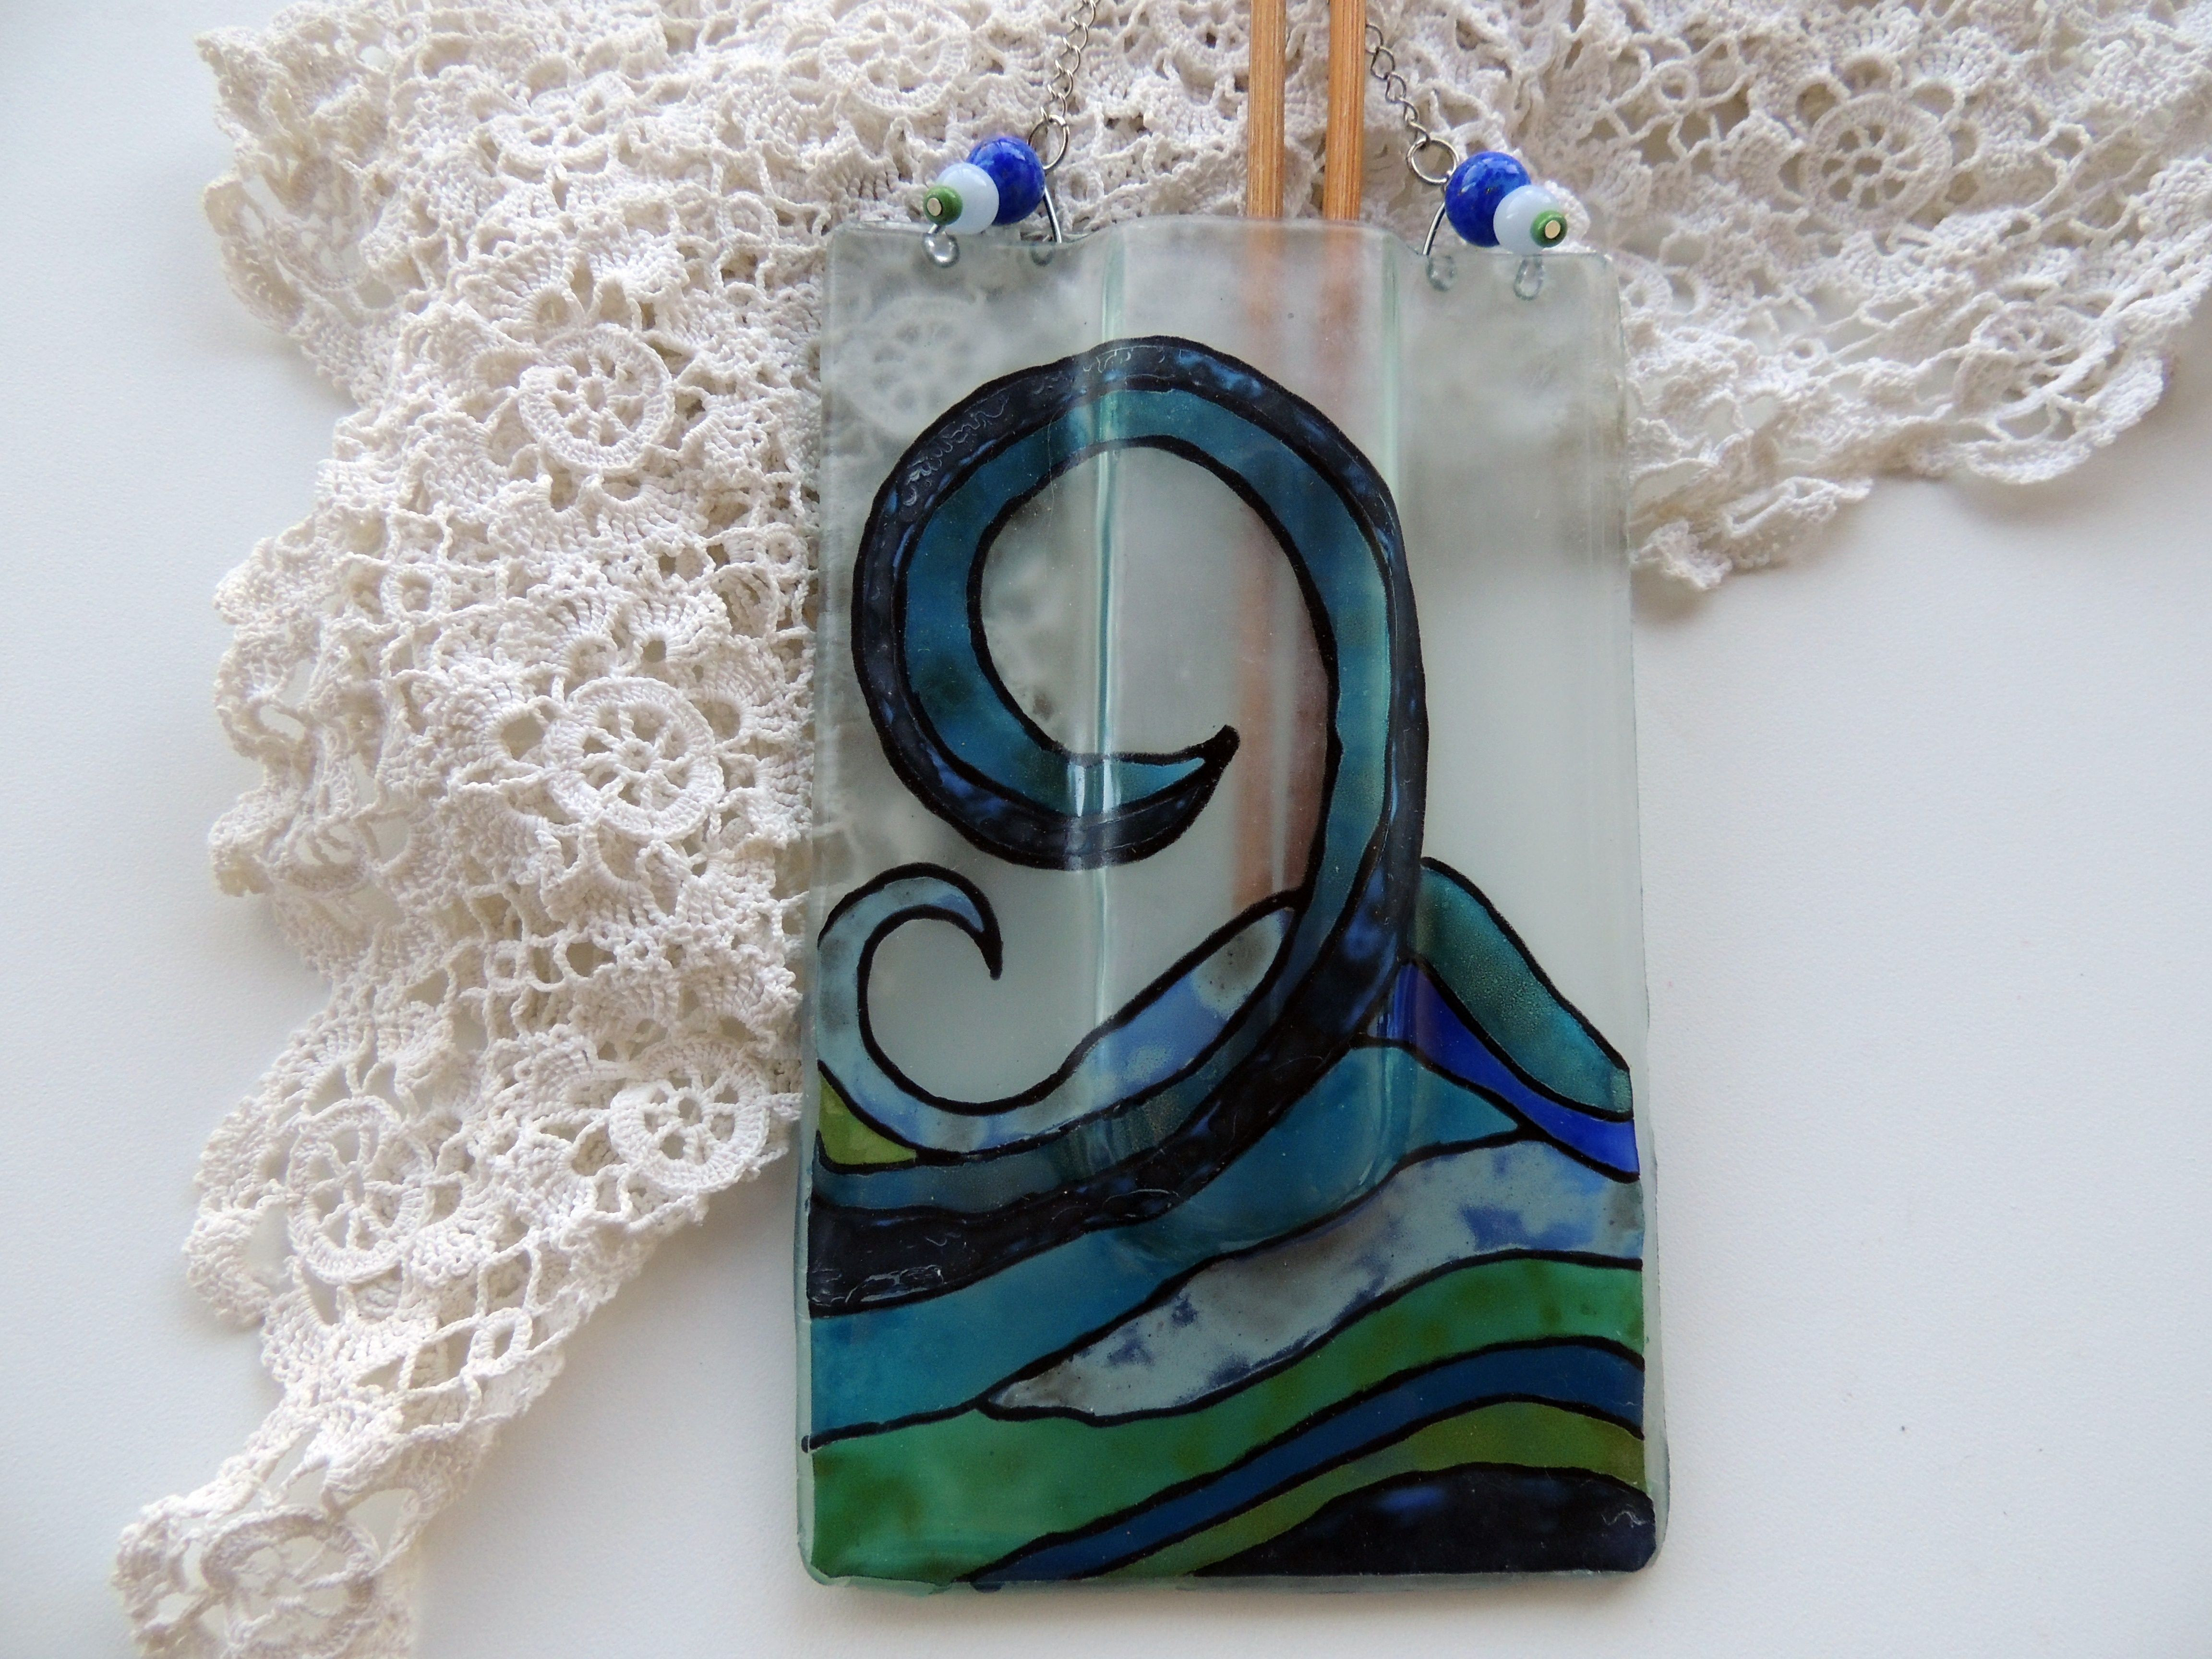 Fused Glass Wall Vase Of Fused Glass Pocket Vasepainted Fused Vasepainted Wall Vasewall with Regard to Fused Glass Pocket Vasepainted Fused Vasepainted Wall Vasewall Painted Sea